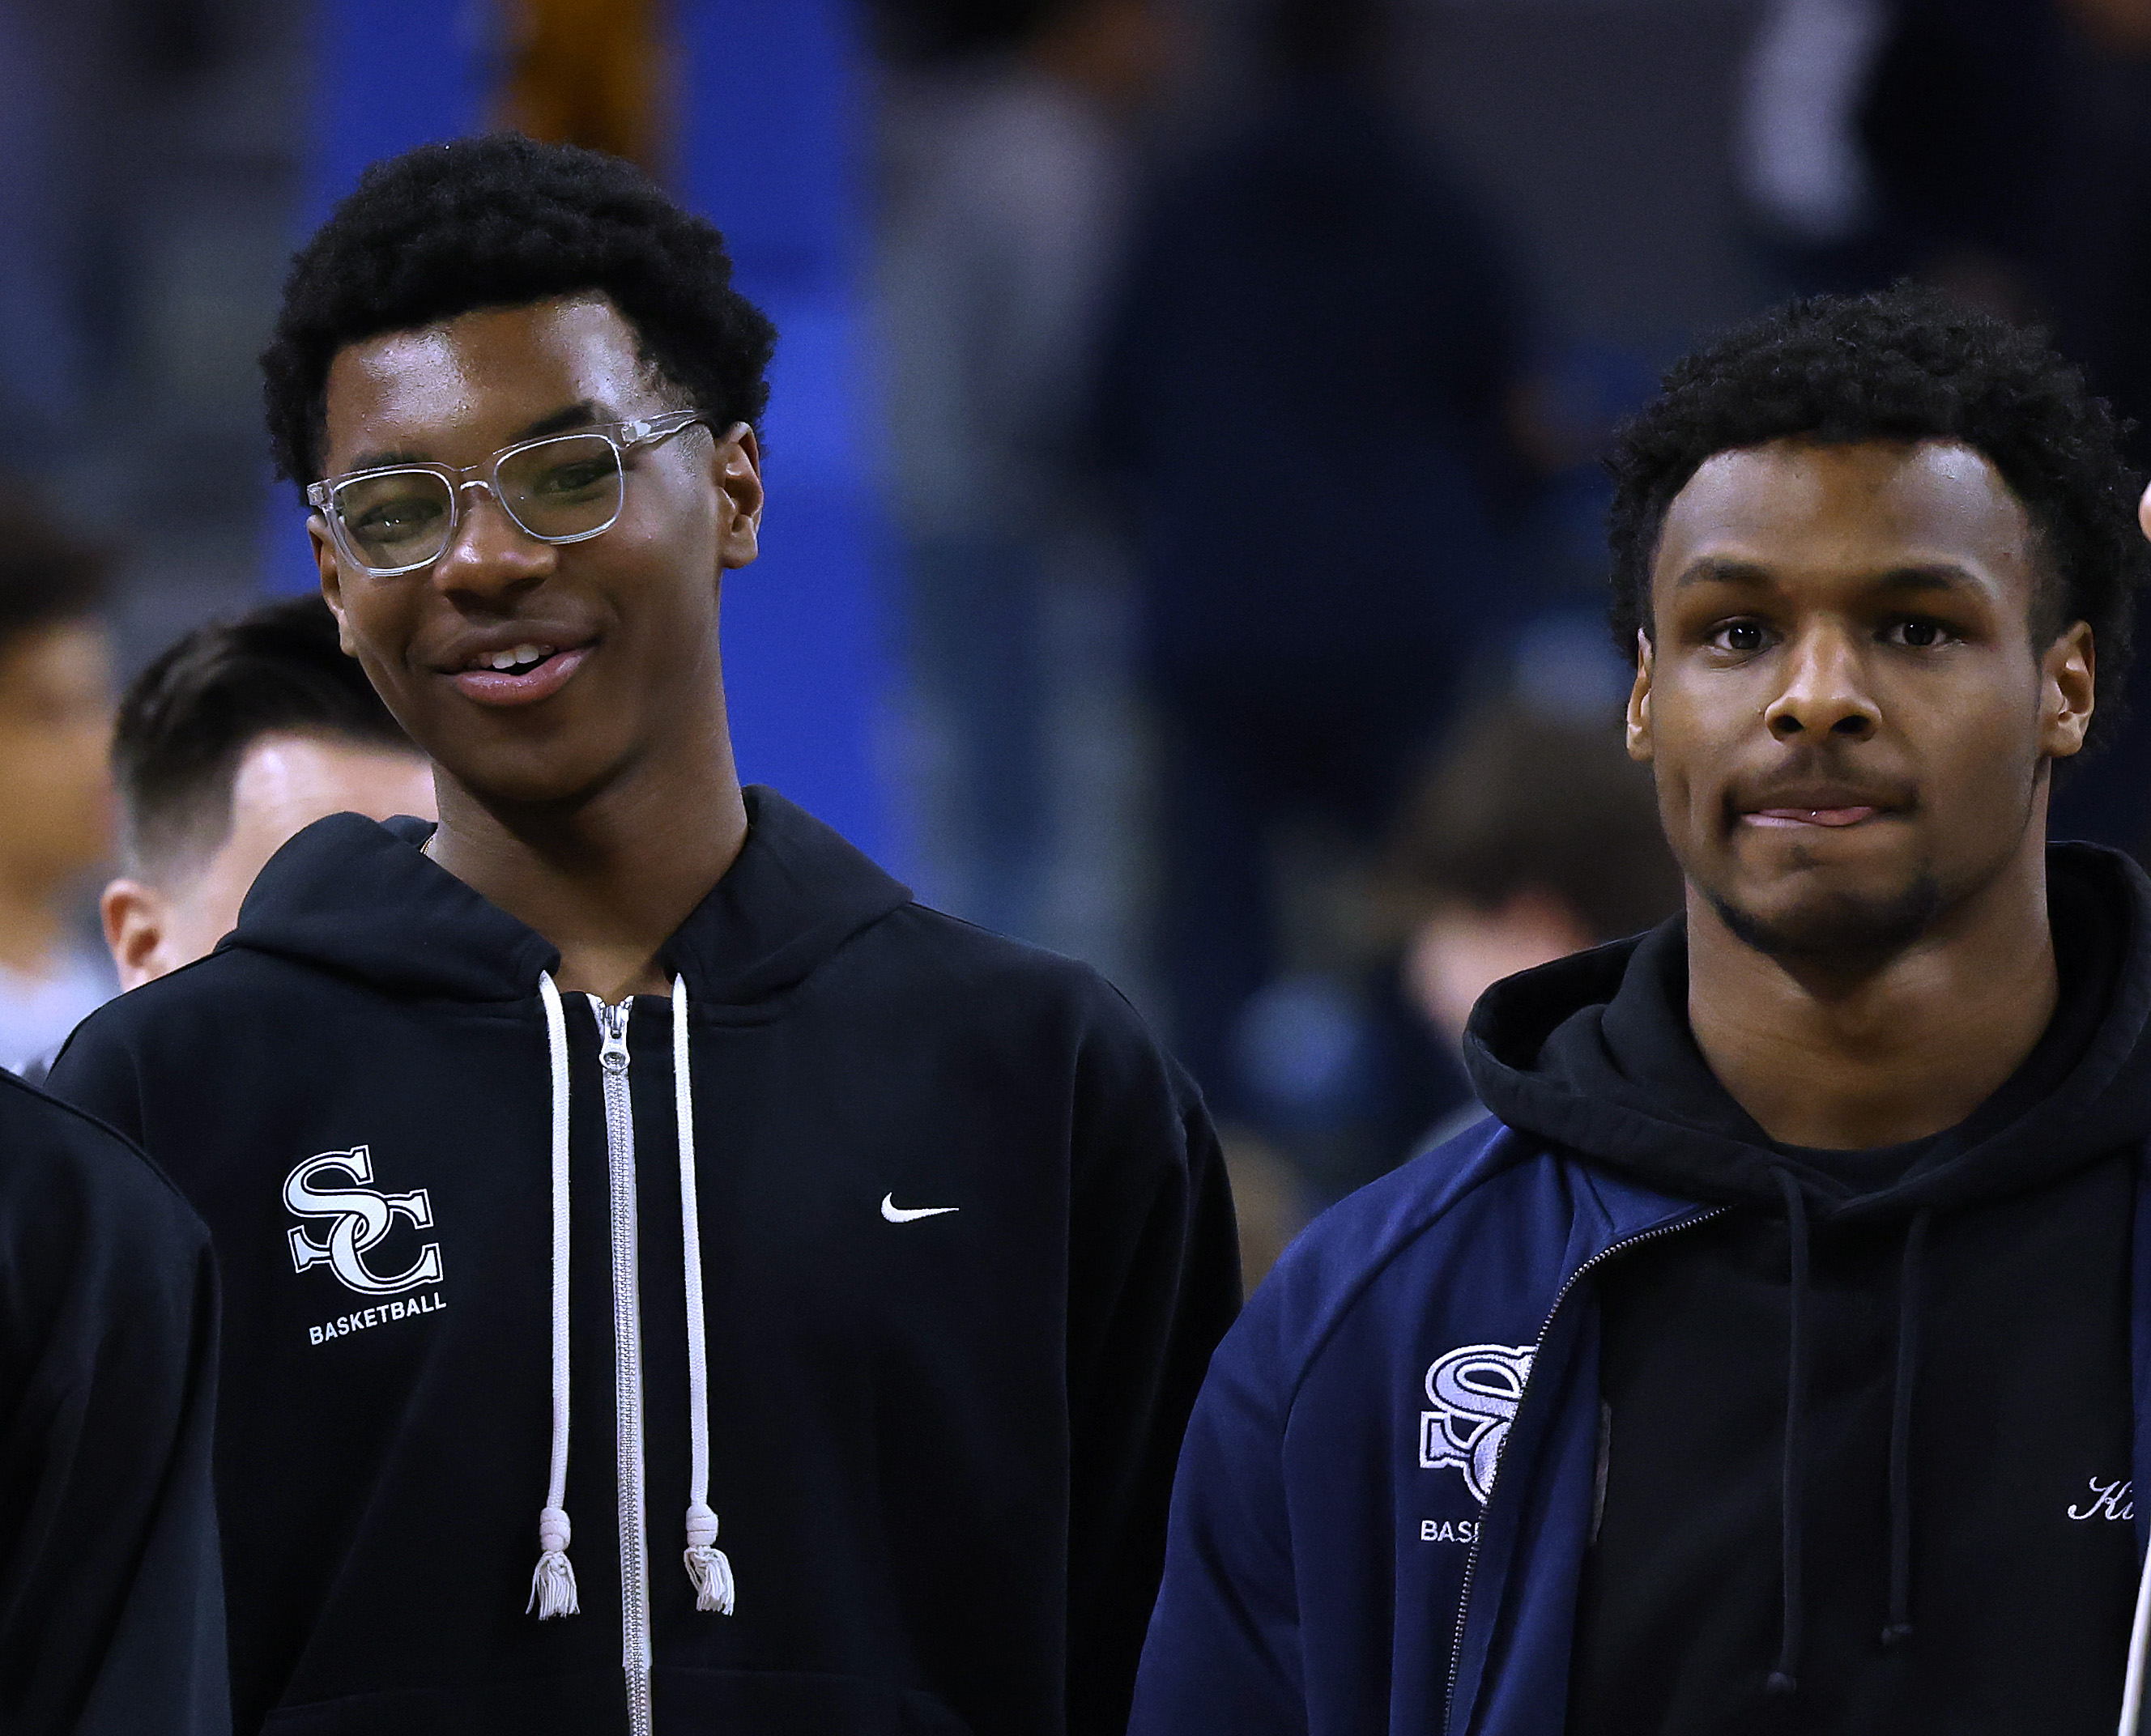 Bronny James, Zaire Wade expected to attend Sierra Canyon – The